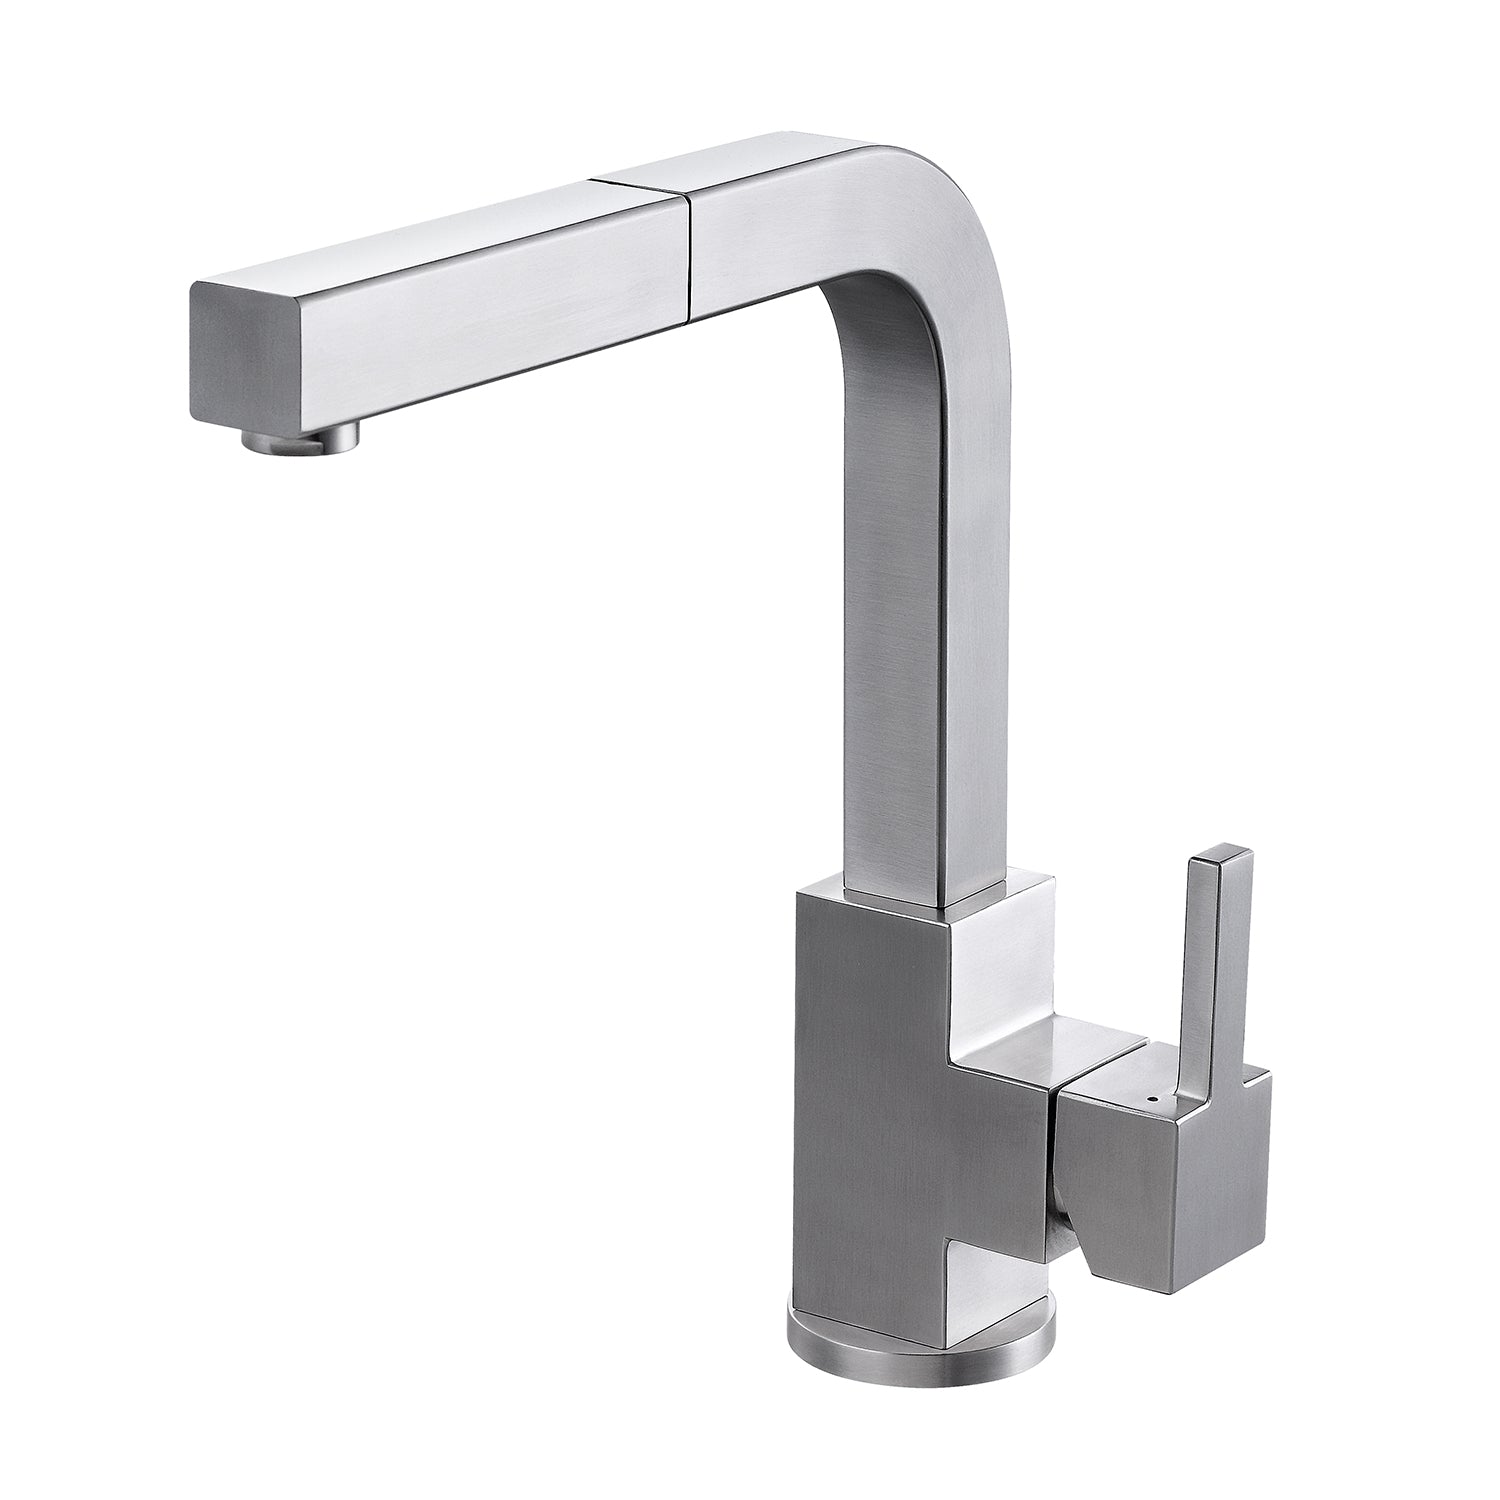 DAX Single Handle Pull Down Kitchen Faucet - Brushed Nickel (DAX-12072-BN)